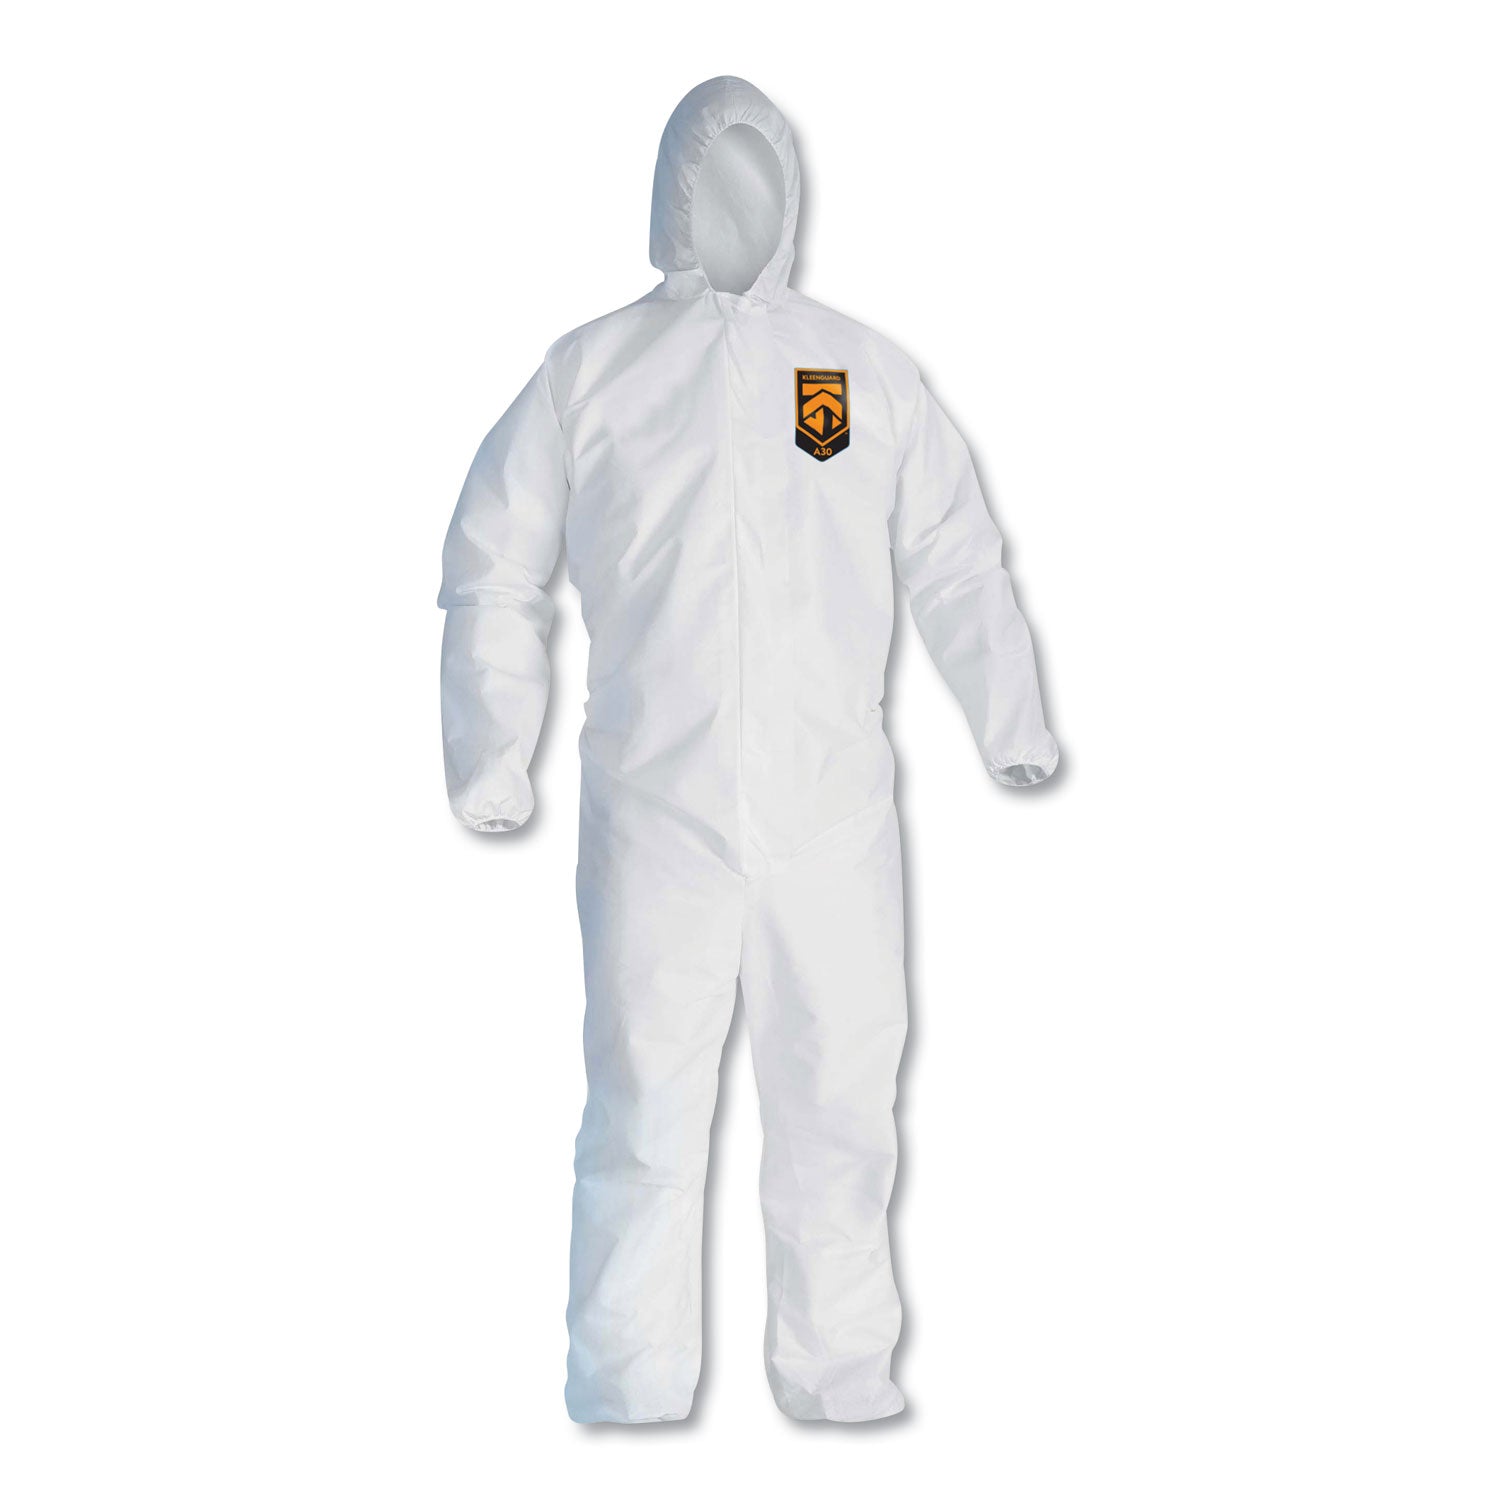 a30-elastic-back-and-cuff-hooded-coveralls-2x-large-white-25-carton_kcc46115 - 1